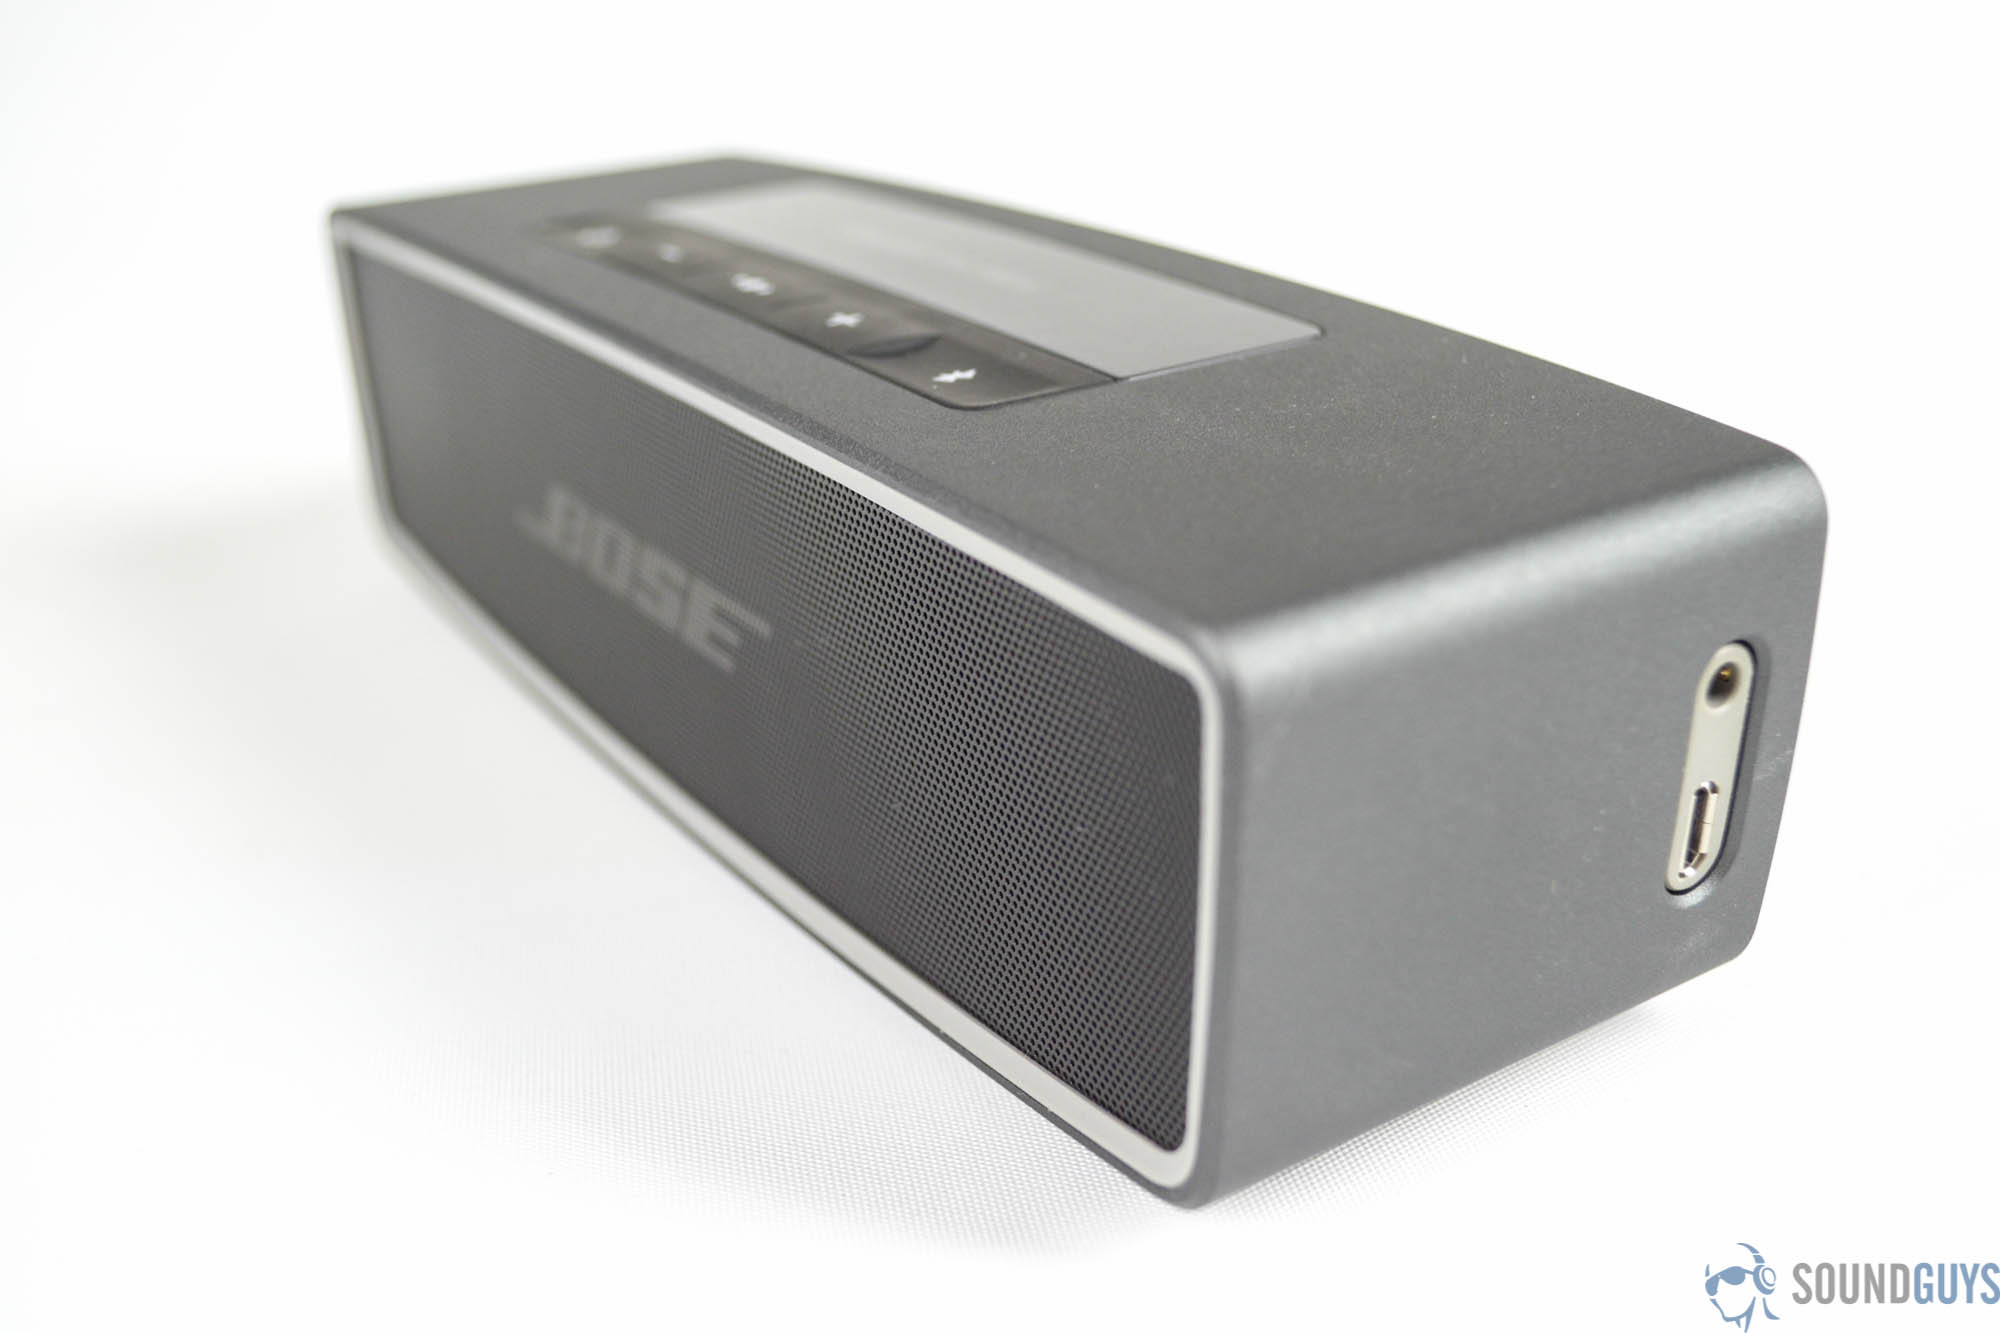 series precocious Tranquility Bose SoundLink Mini 2 Review